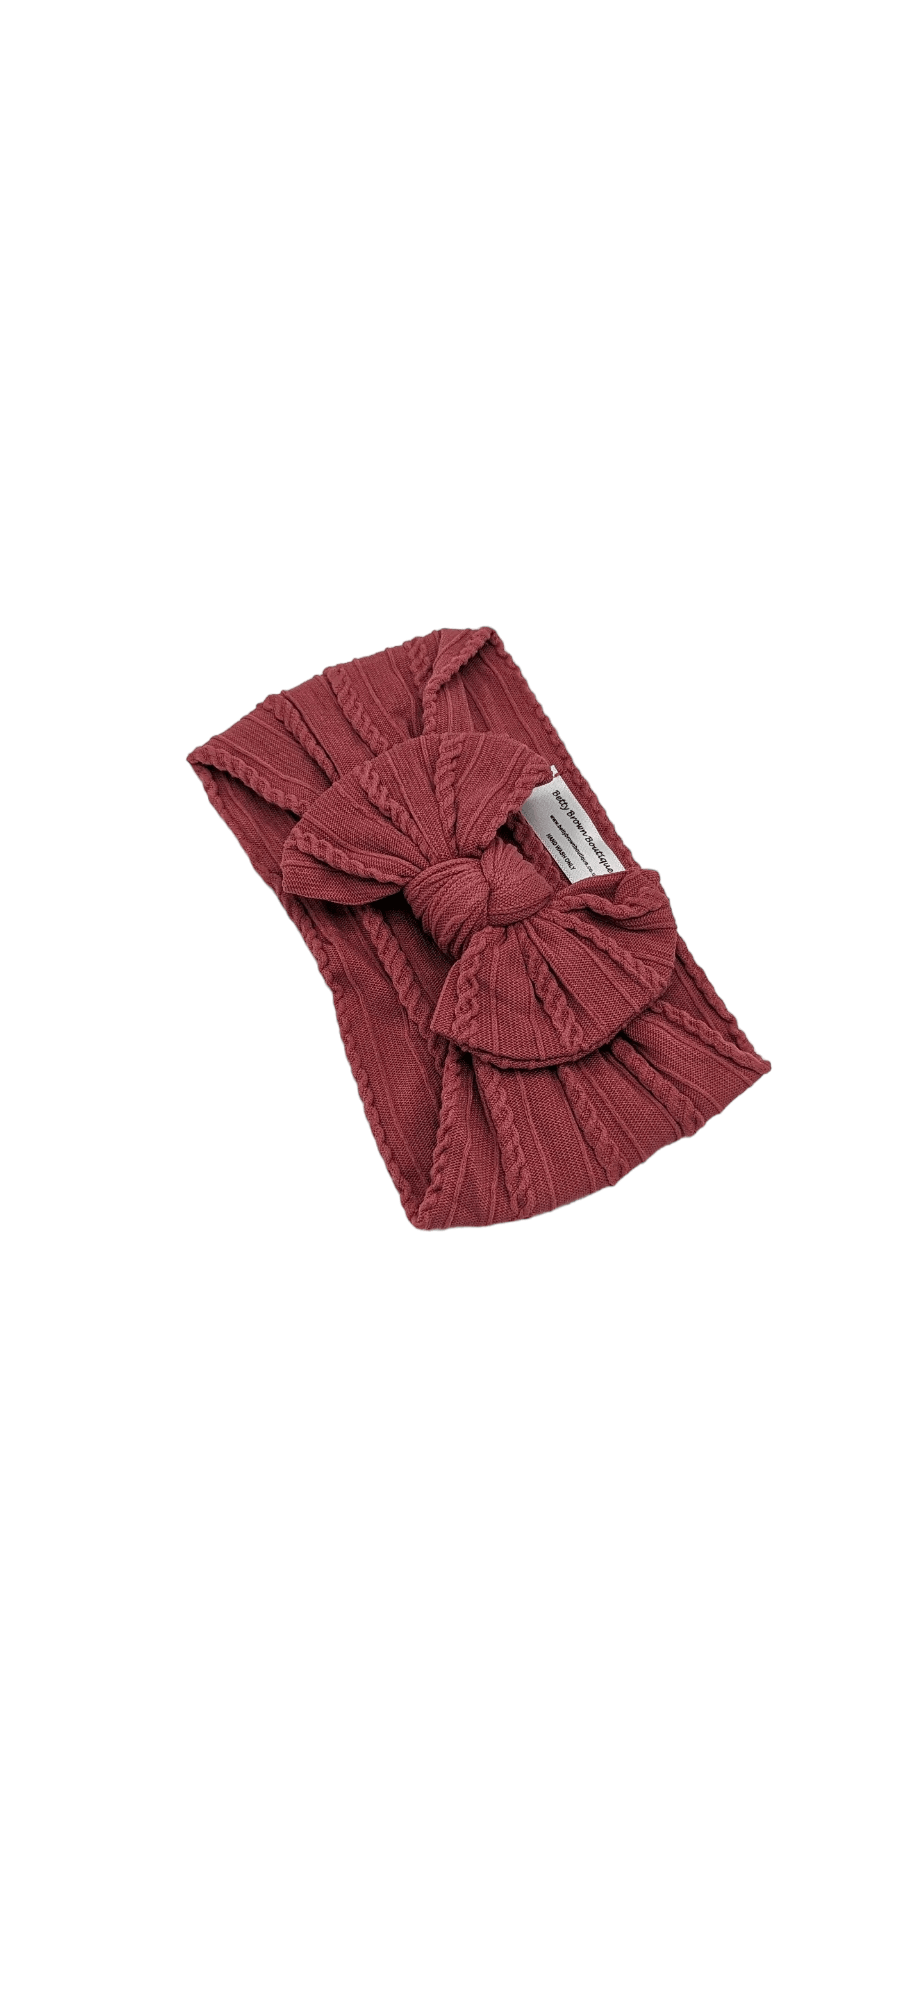 Pale Raspberry Smaller Bow Cable Knit Headwrap - Betty Brown Boutique Ltd